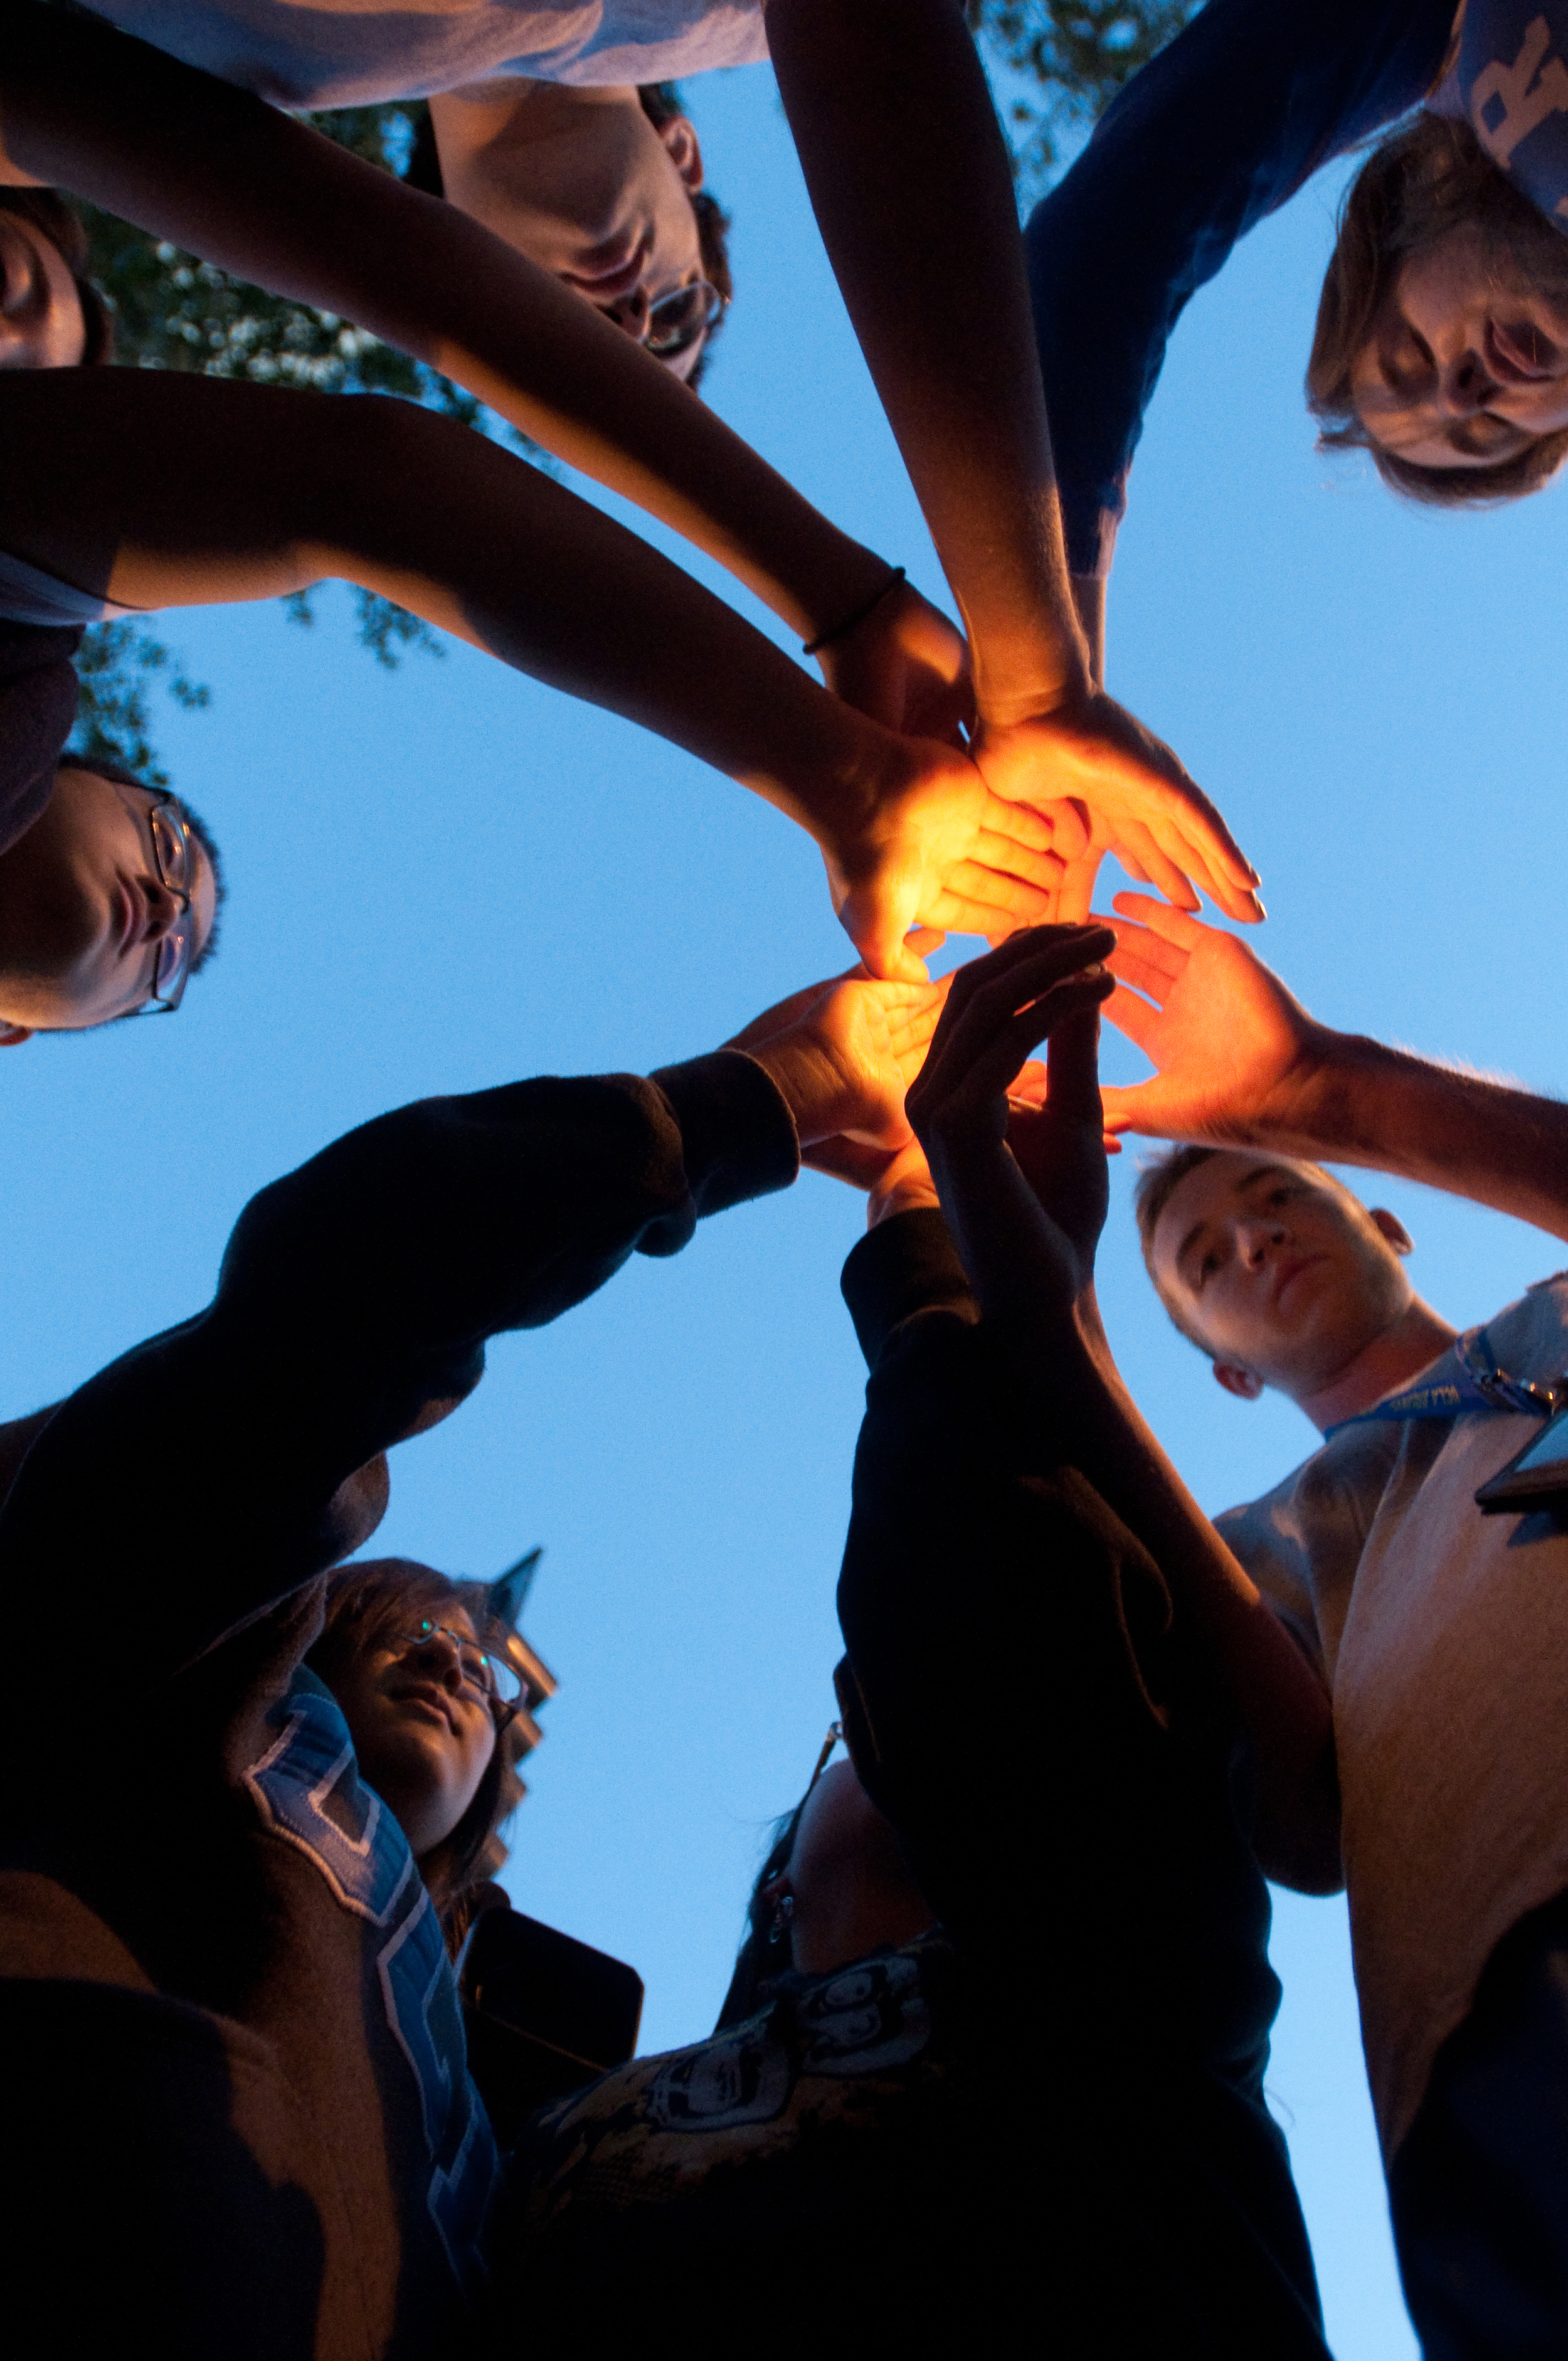  LOS ANGELES, CA – Students gather around a candle and share a moment in remembrance of John Wooden outside Ronald Reagan UCLA Medical Center on Friday, June 4, 2010. 